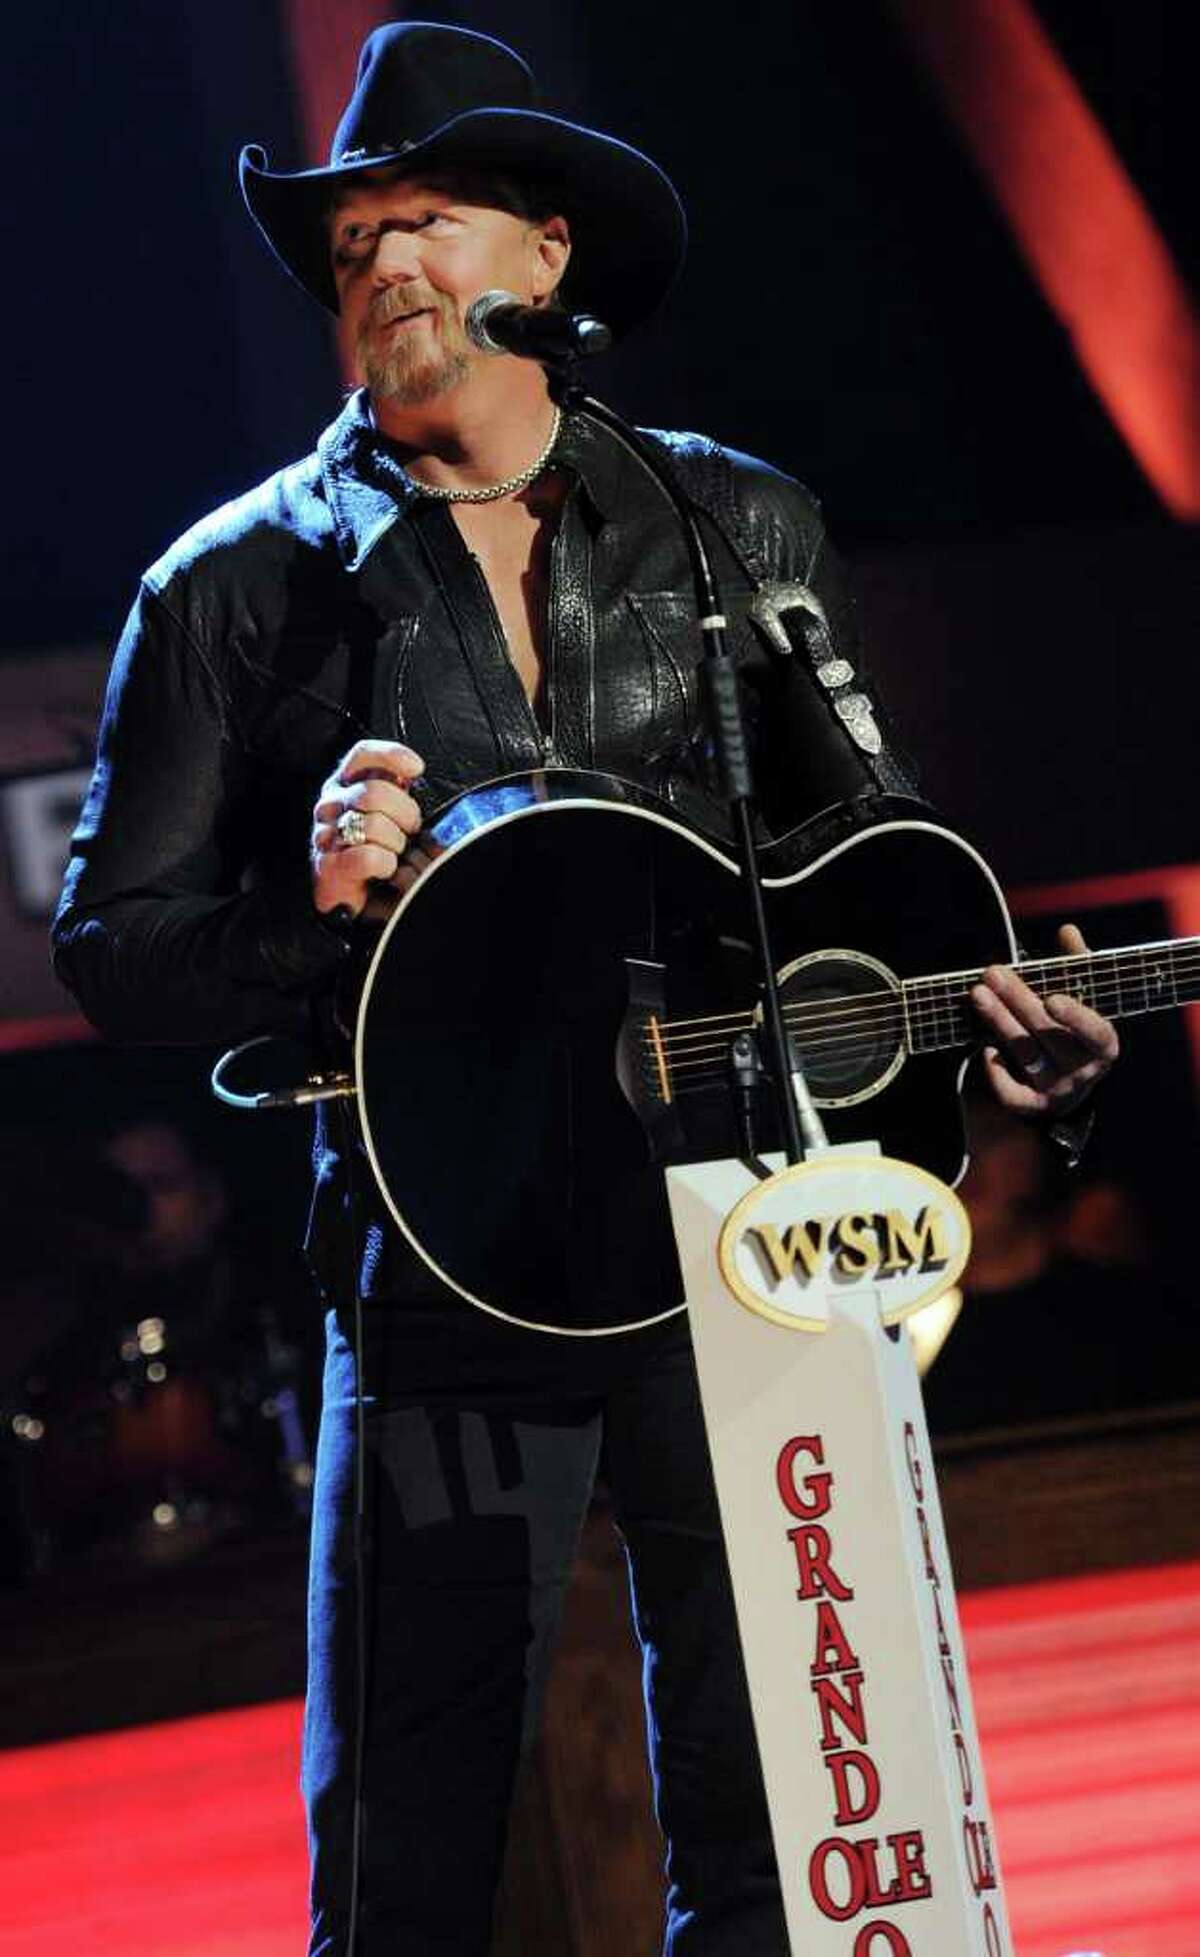 NASHVILLE, TN - SEPTEMBER 28: Recording Artist Trace Adkins performs during Country Comes Home: An Opry Celebration at the Grand Ole Opry House on September 28, 2010 in Nashville, Tennessee. The Grand Ole Opry House has been restored following damage sustained during flooding in May 2010. (Photo by Rick Diamond/Getty Images) *** Local Caption *** Trace Adkins